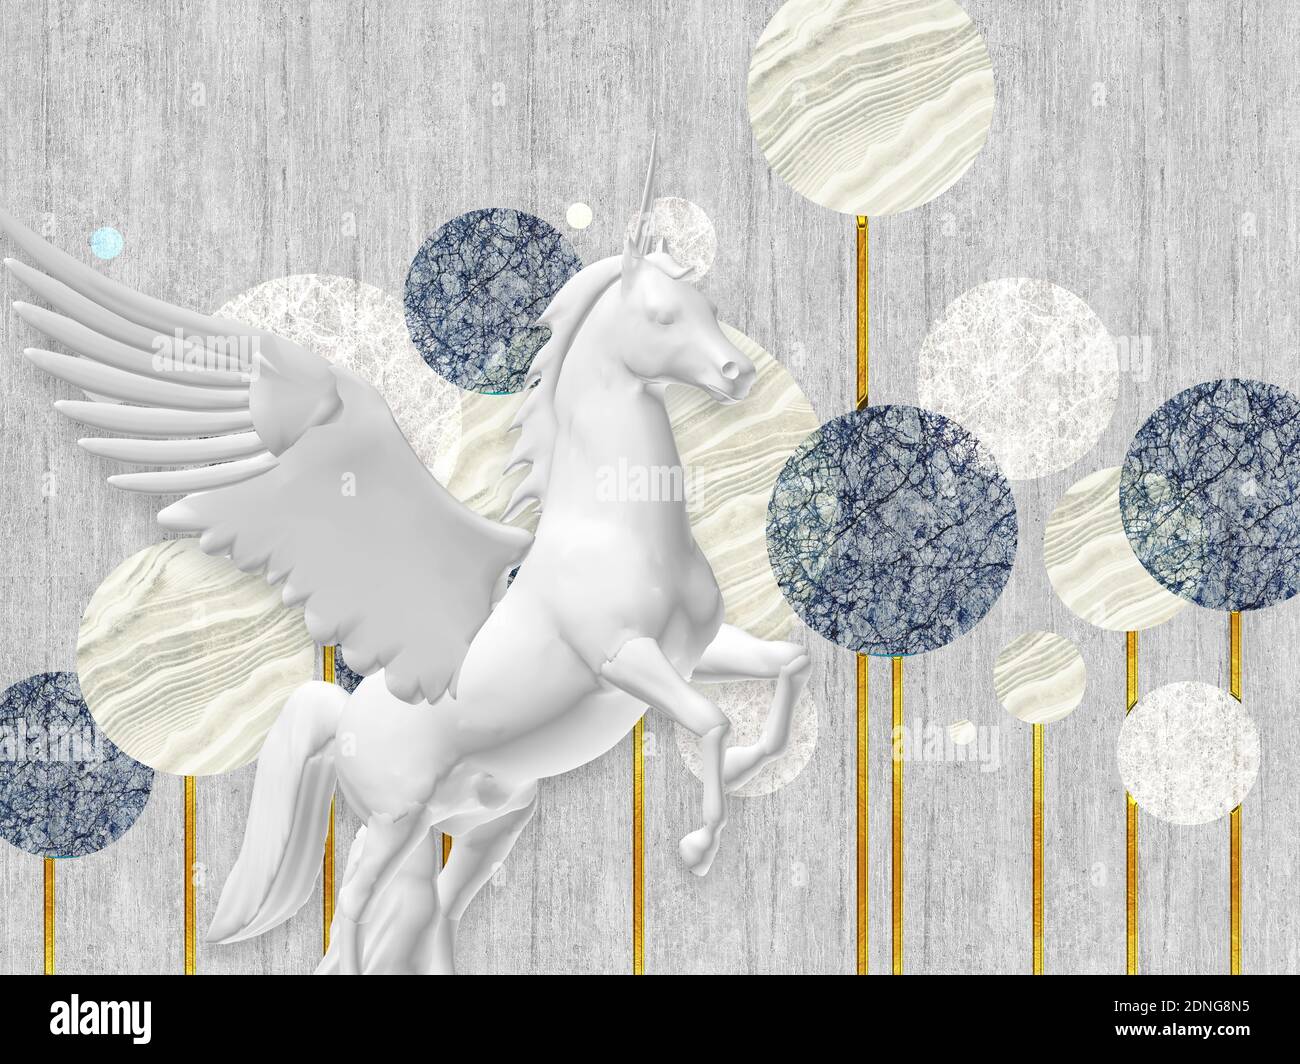 3d illustration, gray background, fabulous monochrome dandelions on gilded stems, gray pegasus in the foreground Stock Photo